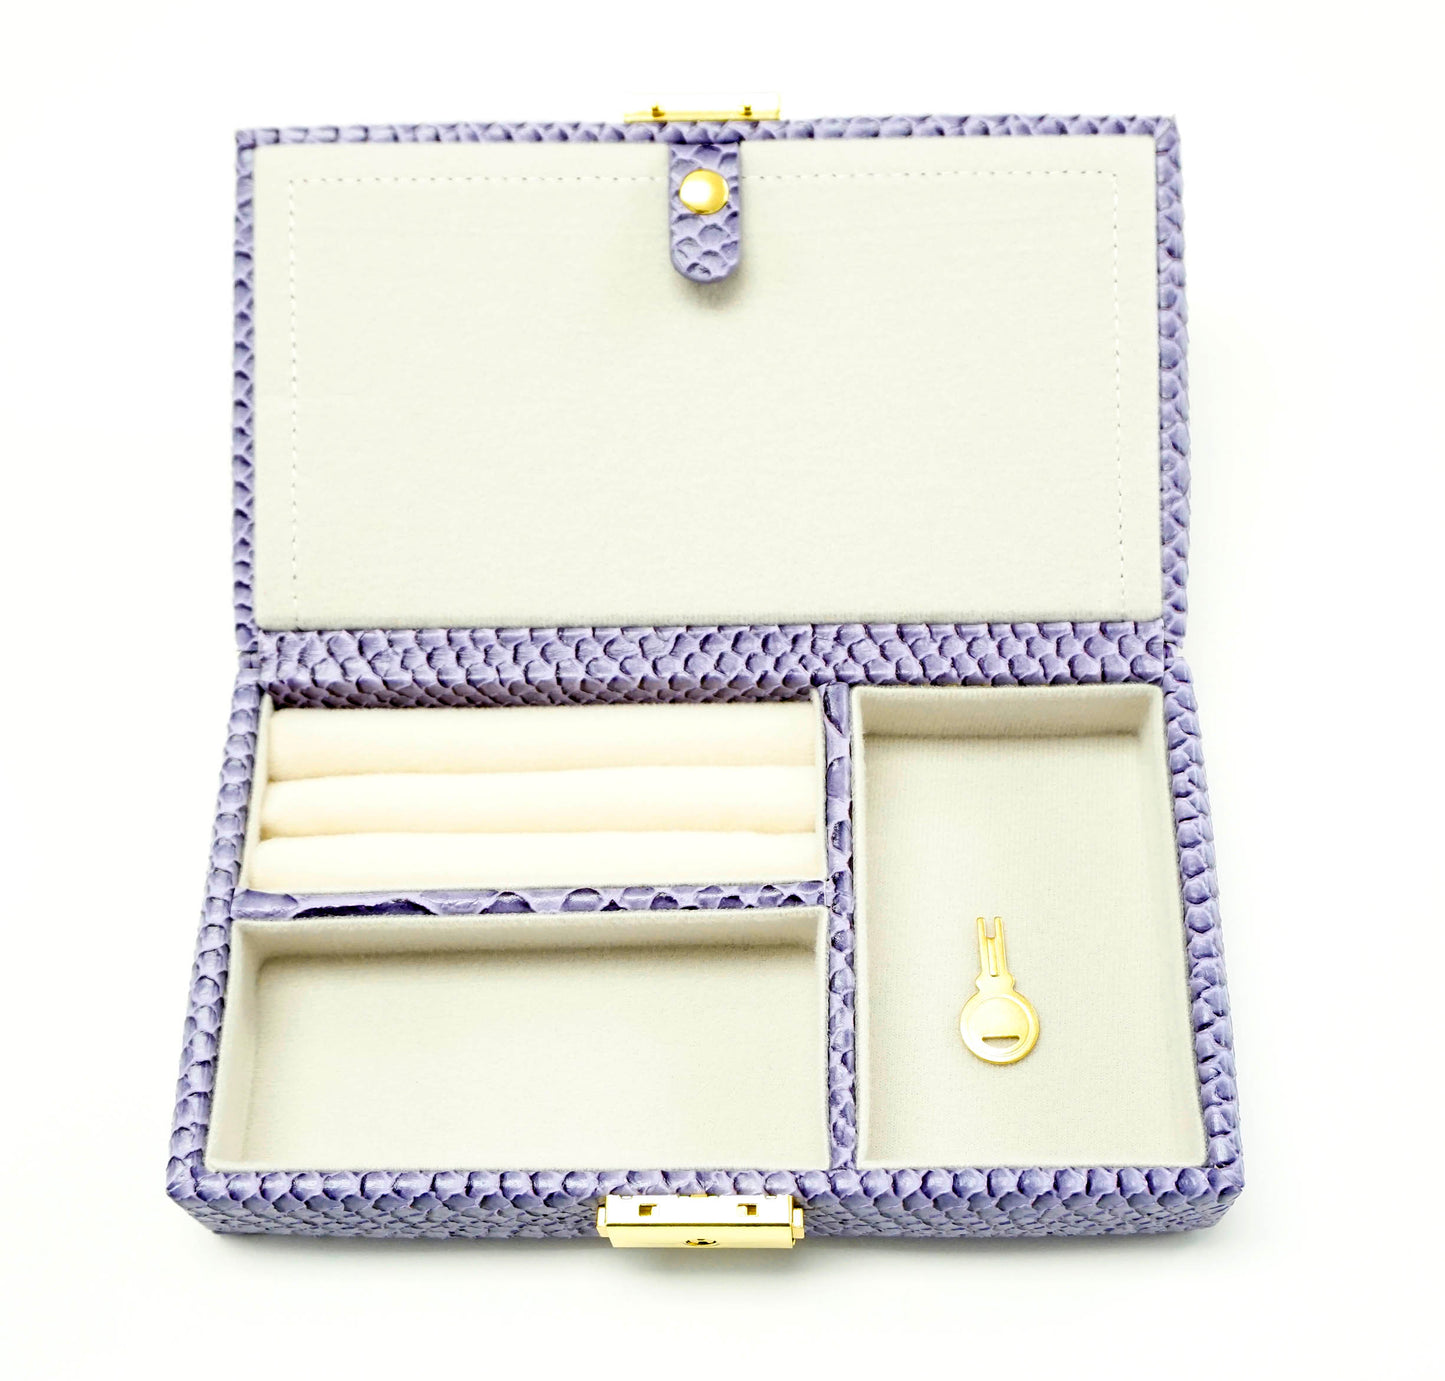 Leather Jewelry Box ~ Purple Leather Jewelry Box with Interior Compartments for Needlepoint Canvas LEE